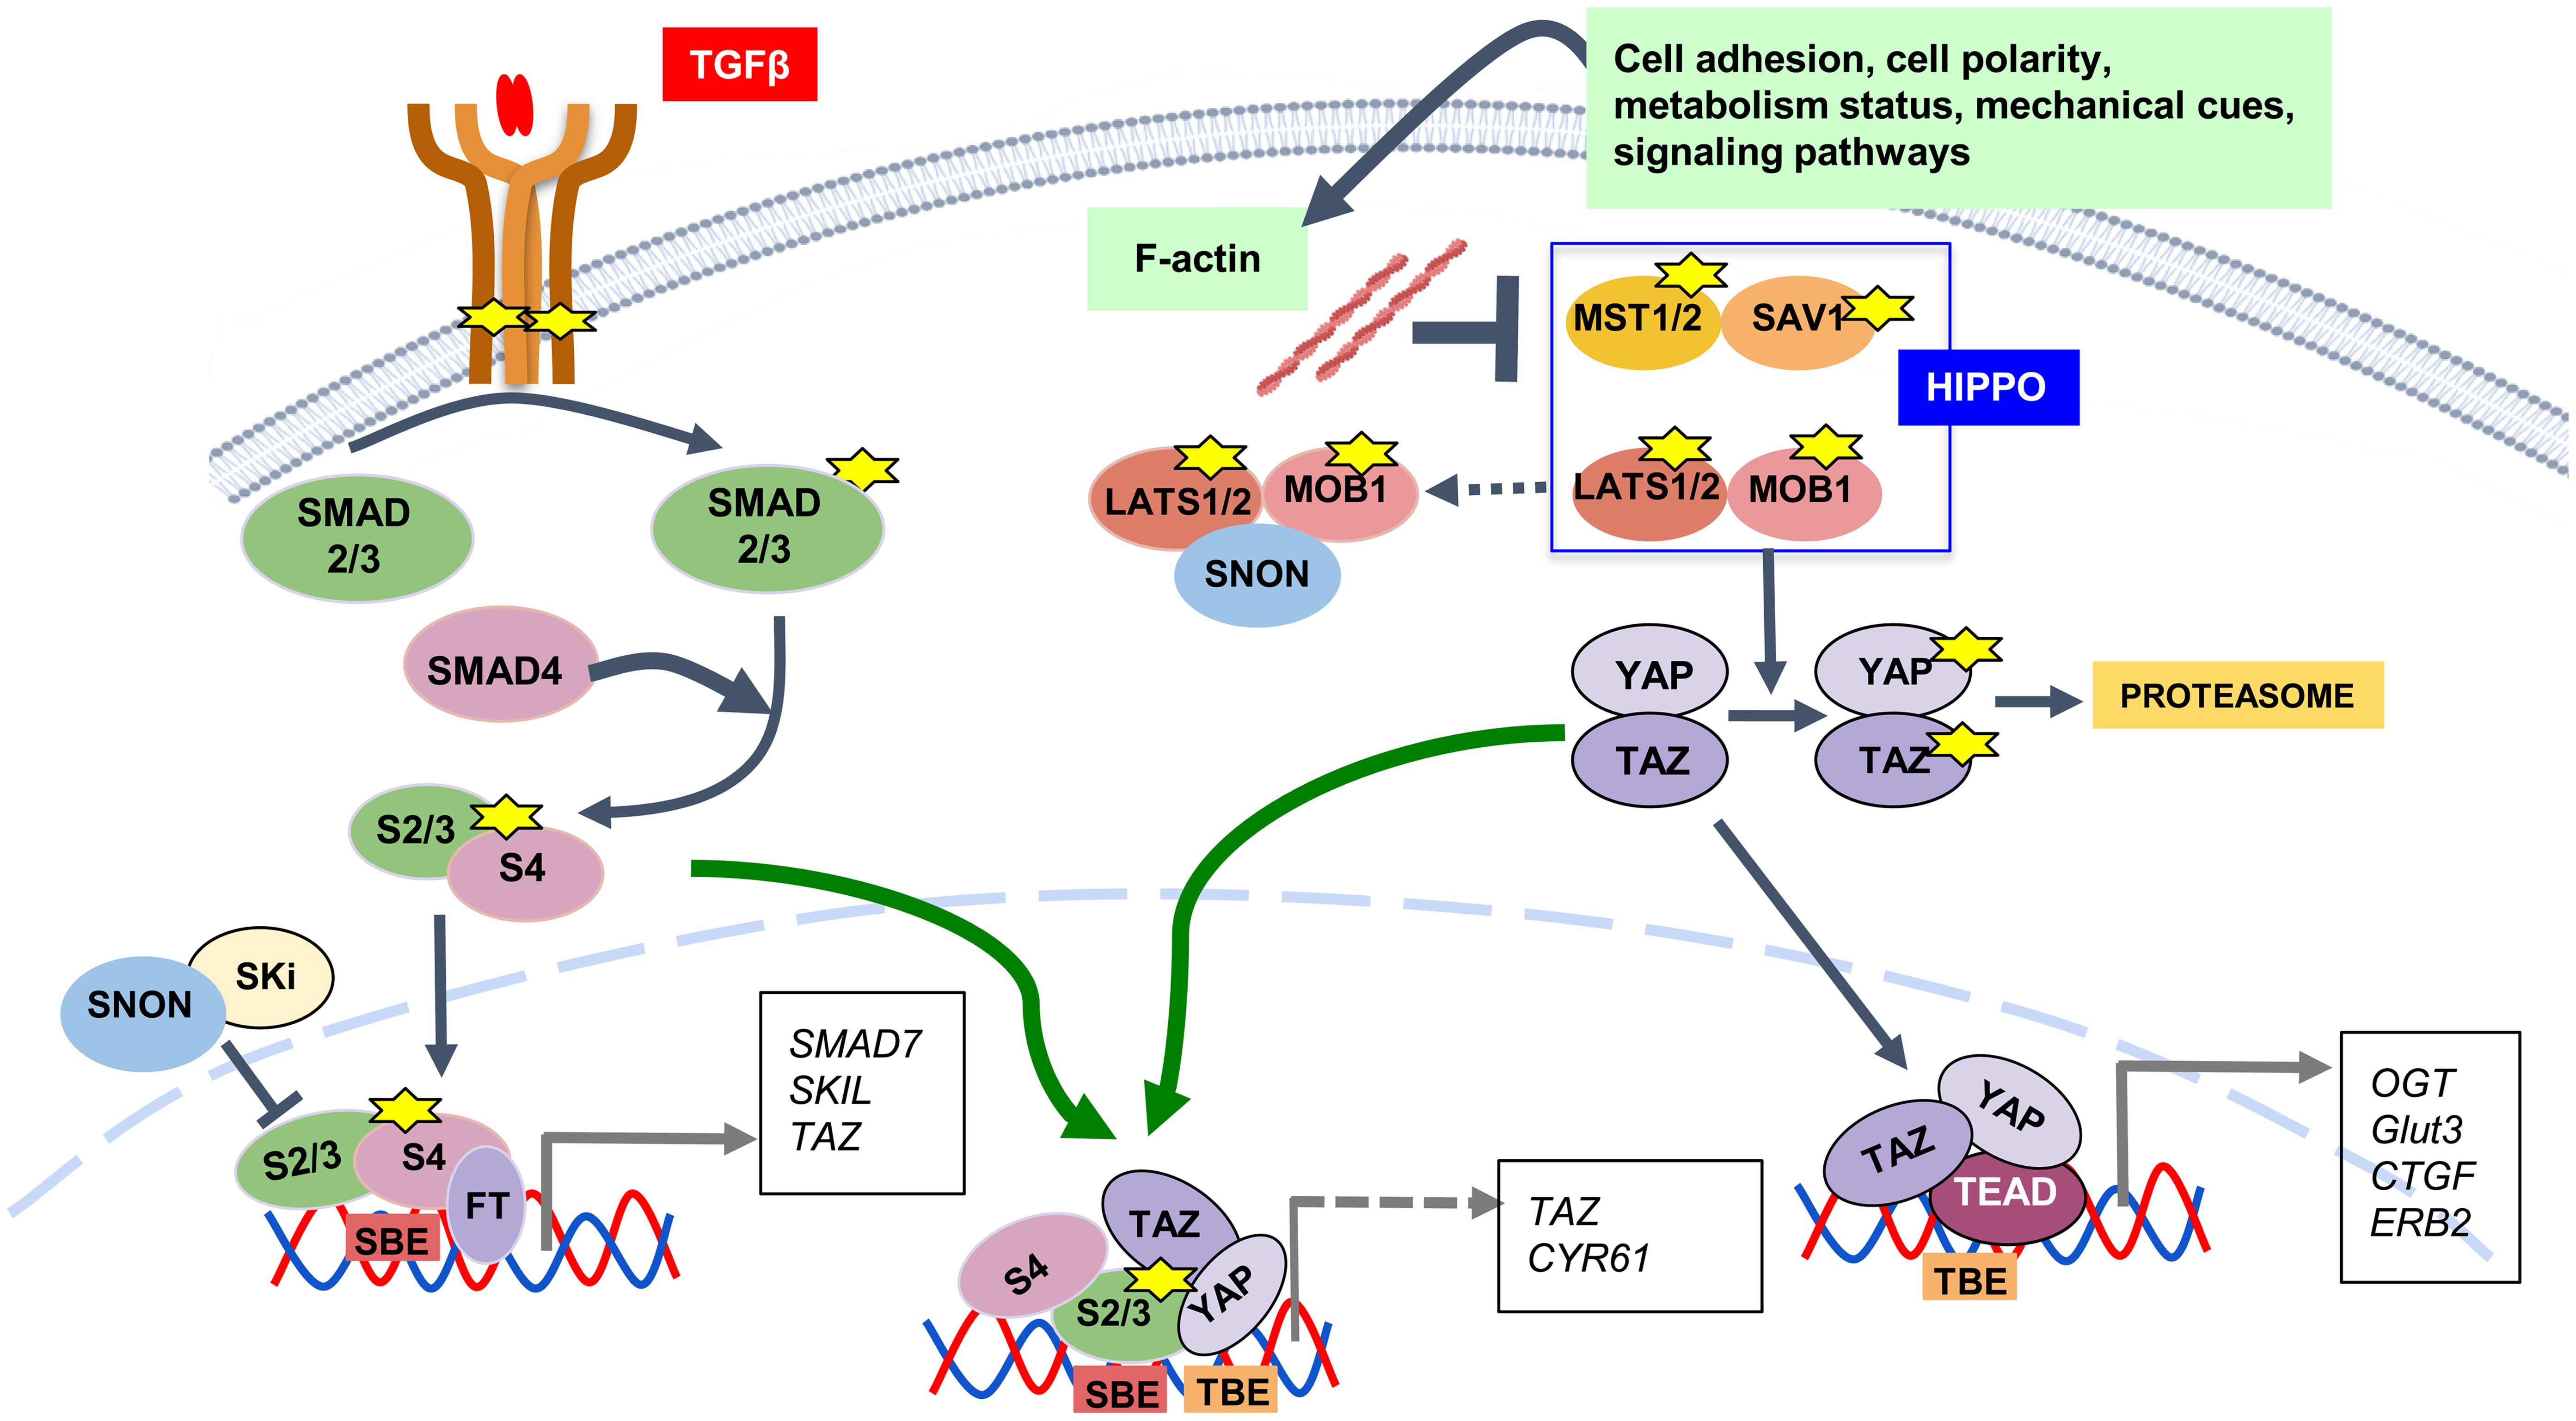 The canonical HIPPO and TGF-β signaling pathways.